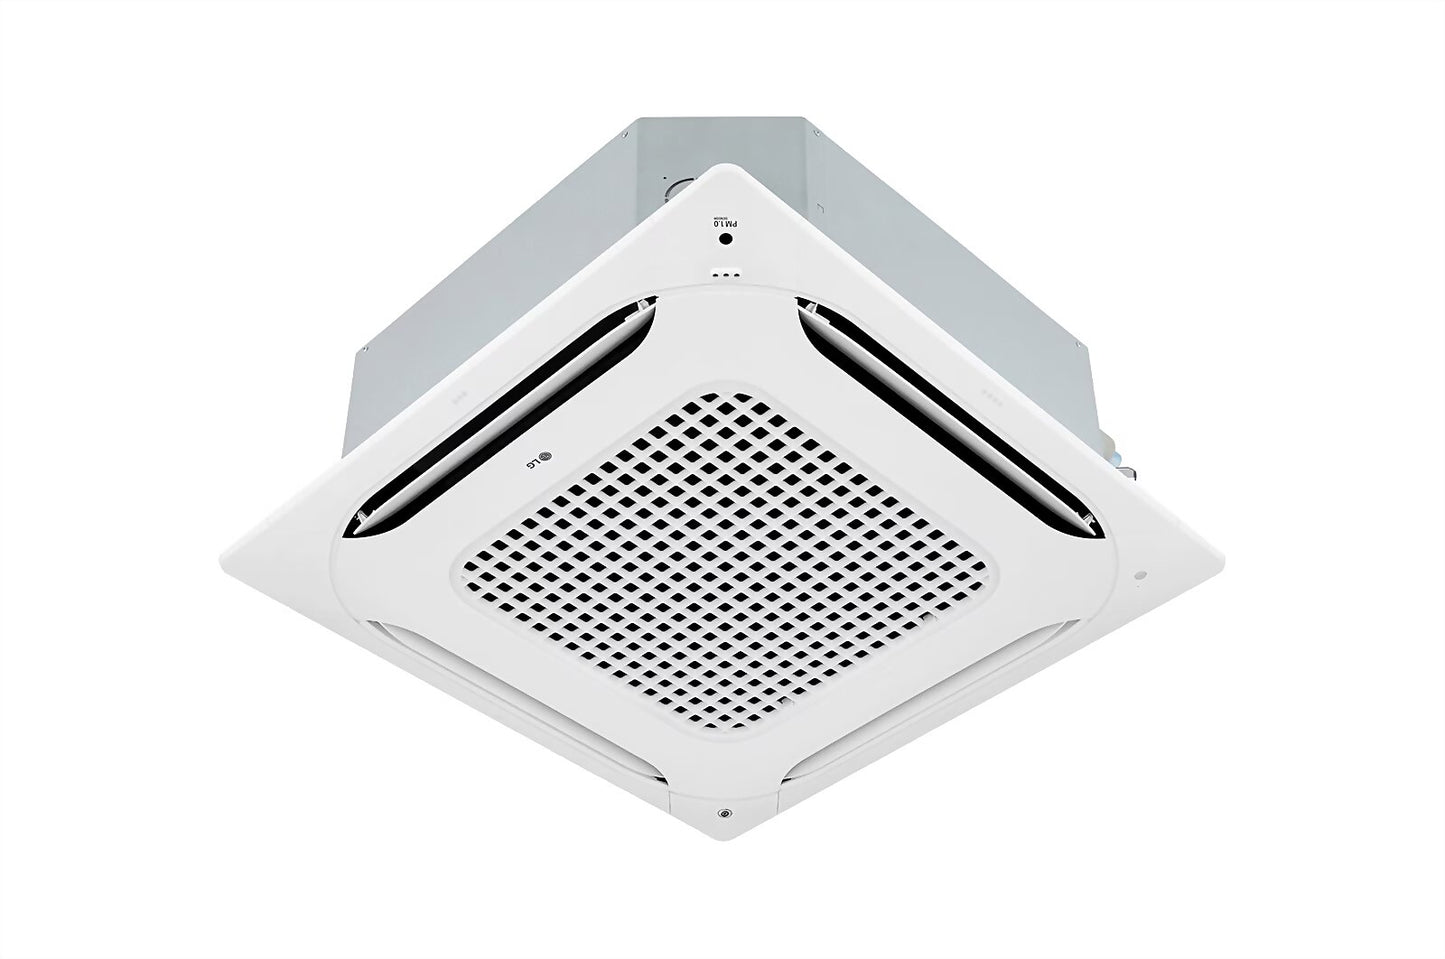 LG Ceiling Mounted 4 Way Cassette Inverter  AC 7.1KW with Advanced Air Purification and Independent Vane Control - ARNU24GTBB4